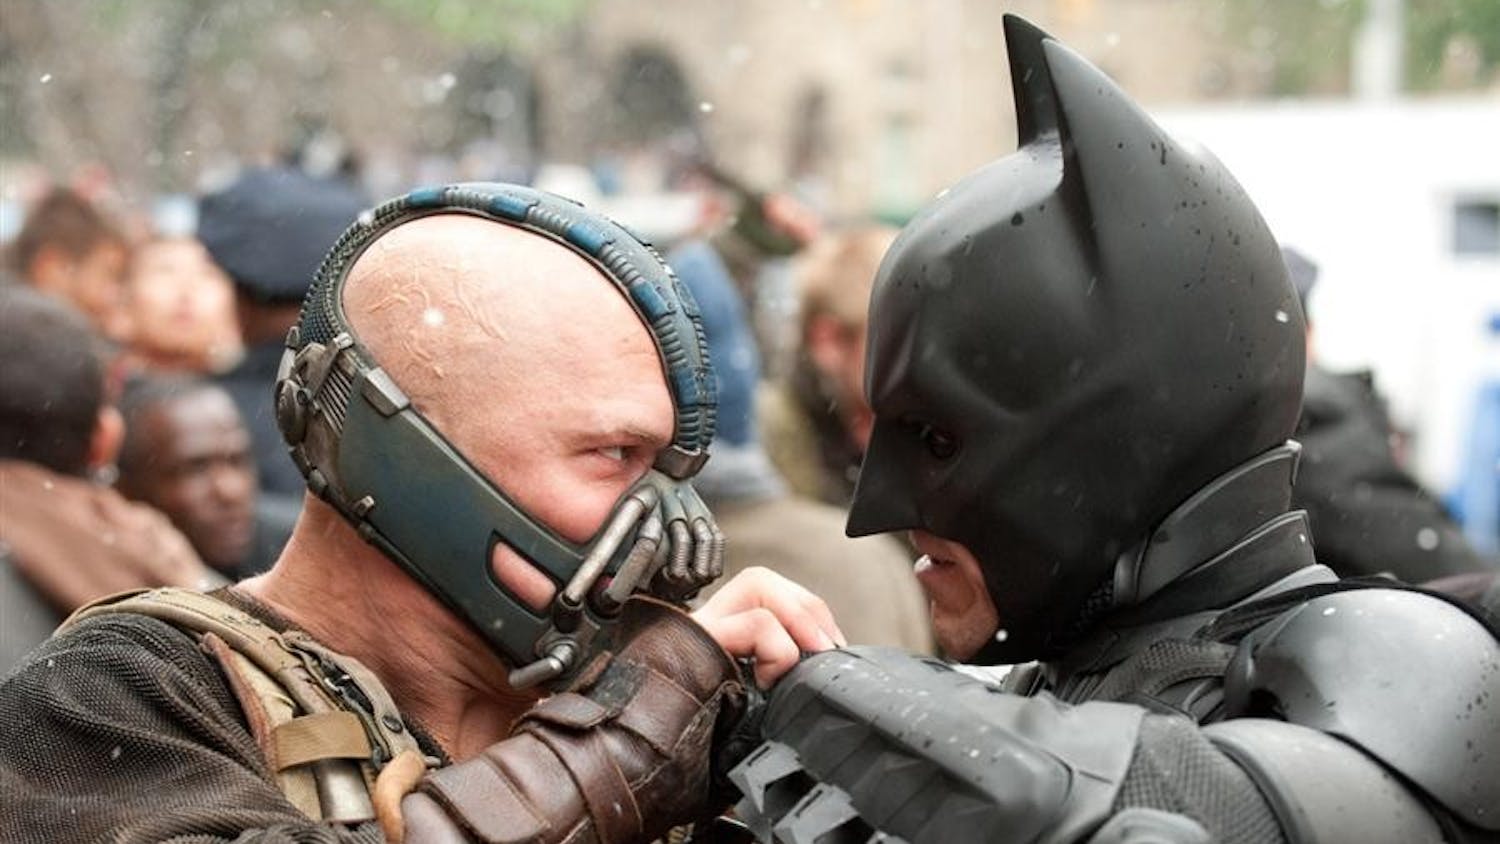 Bane and the Bat armwrestle for Gotham.